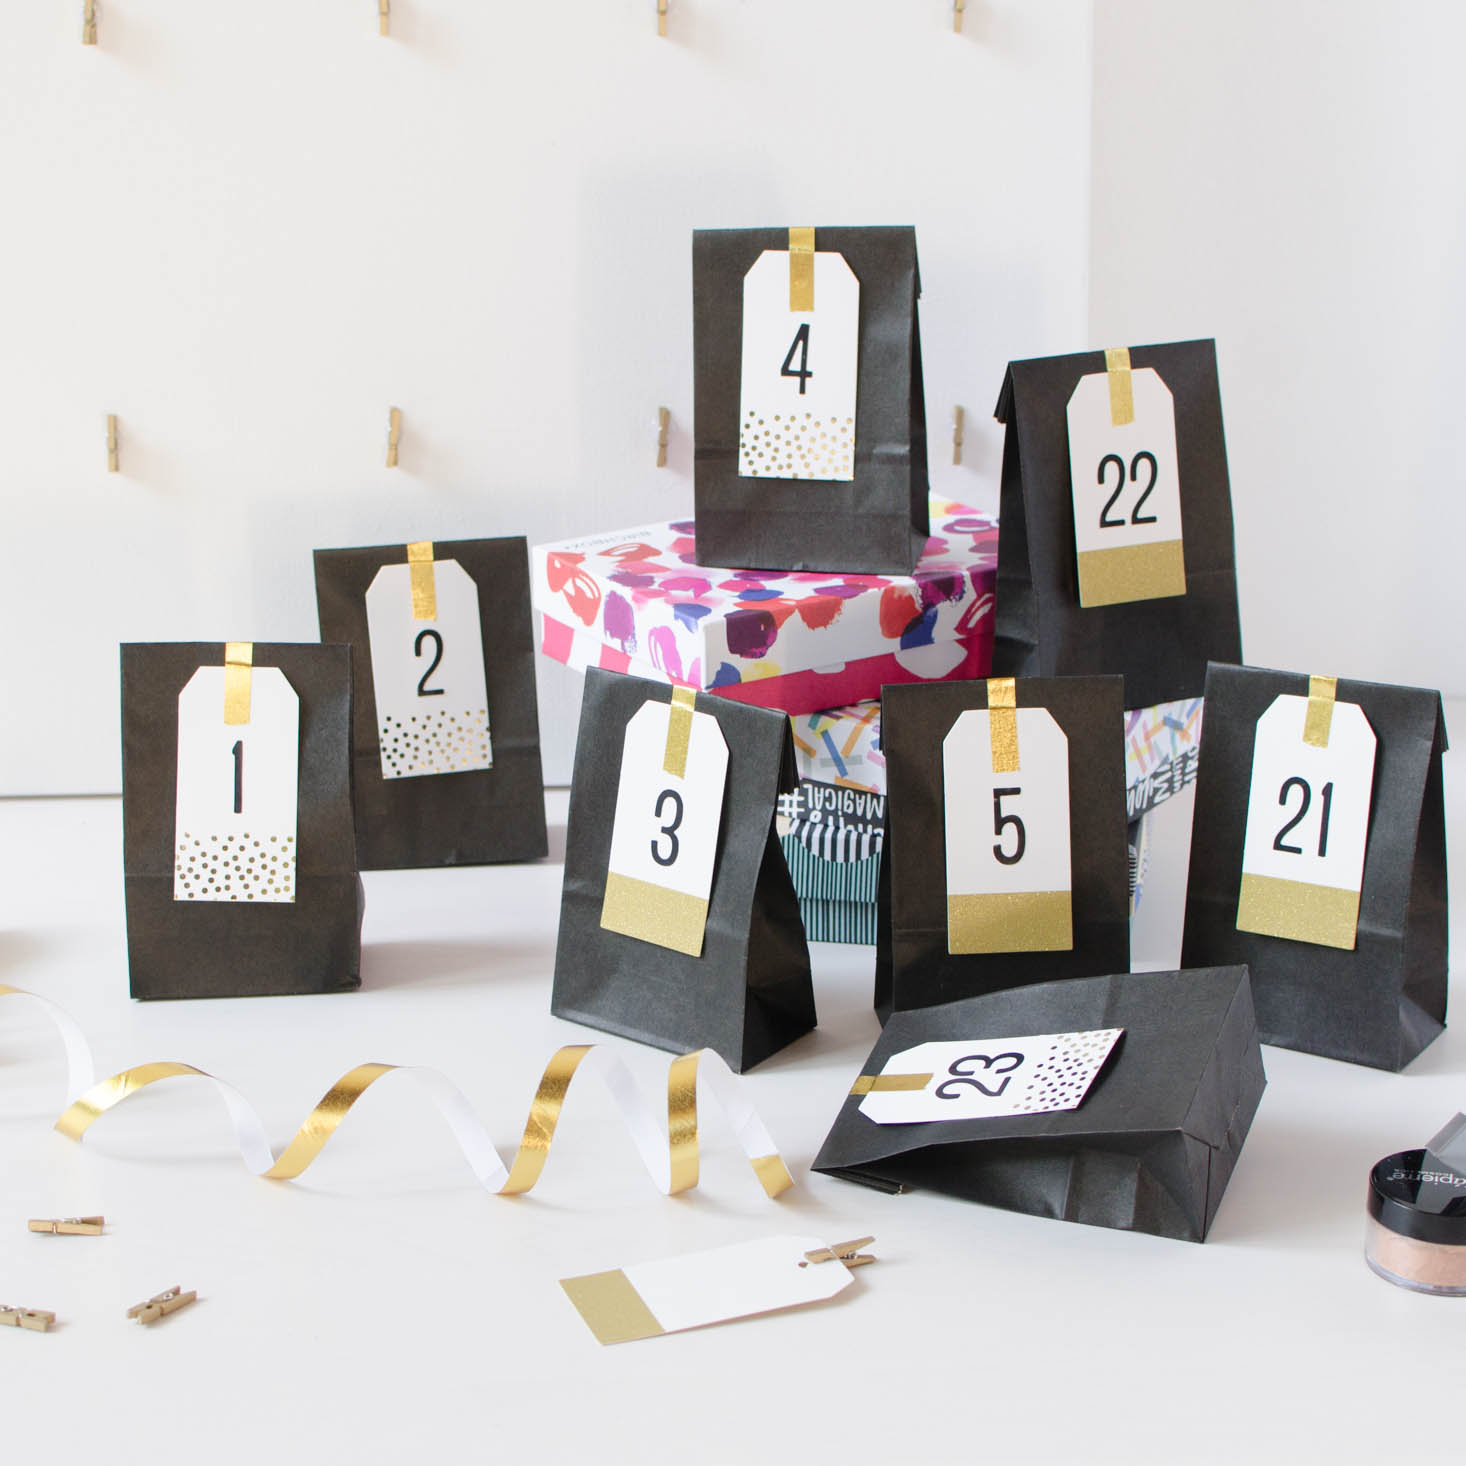 Make Your Own DIY Advent Calendar with Beauty Samples!